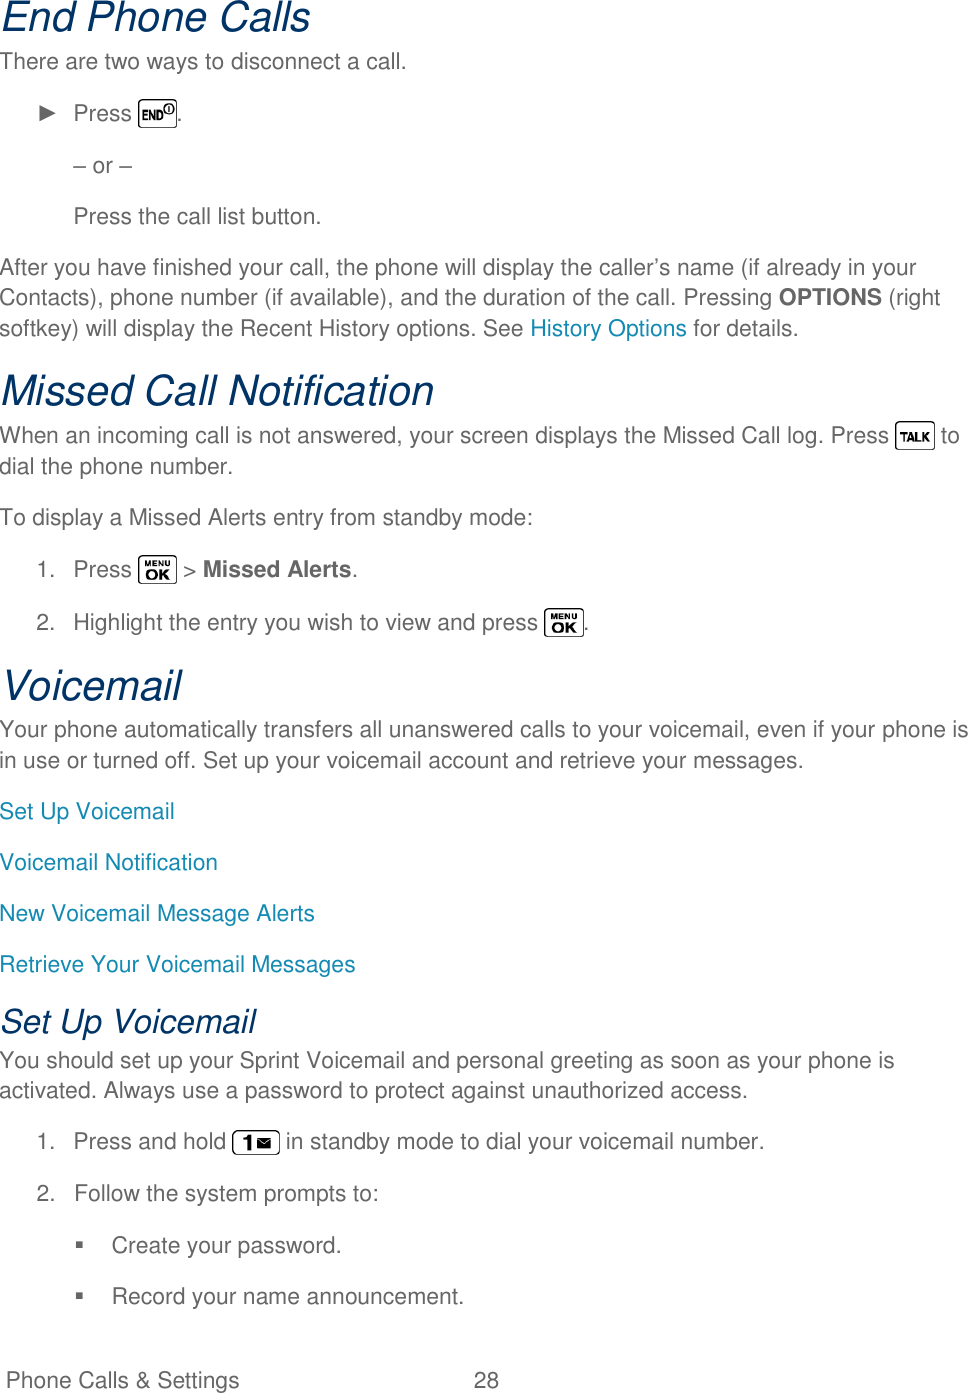   Phone Calls &amp; Settings  28   End Phone Calls There are two ways to disconnect a call. ►  Press  . – or – Press the call list button. After you have finished your call, the phone will display the caller‘s name (if already in your Contacts), phone number (if available), and the duration of the call. Pressing OPTIONS (right softkey) will display the Recent History options. See History Options for details. Missed Call Notification When an incoming call is not answered, your screen displays the Missed Call log. Press   to dial the phone number. To display a Missed Alerts entry from standby mode: 1.  Press   &gt; Missed Alerts. 2.  Highlight the entry you wish to view and press  . Voicemail Your phone automatically transfers all unanswered calls to your voicemail, even if your phone is in use or turned off. Set up your voicemail account and retrieve your messages. Set Up Voicemail Voicemail Notification New Voicemail Message Alerts Retrieve Your Voicemail Messages Set Up Voicemail You should set up your Sprint Voicemail and personal greeting as soon as your phone is activated. Always use a password to protect against unauthorized access. 1.  Press and hold   in standby mode to dial your voicemail number. 2.  Follow the system prompts to:   Create your password.   Record your name announcement. 